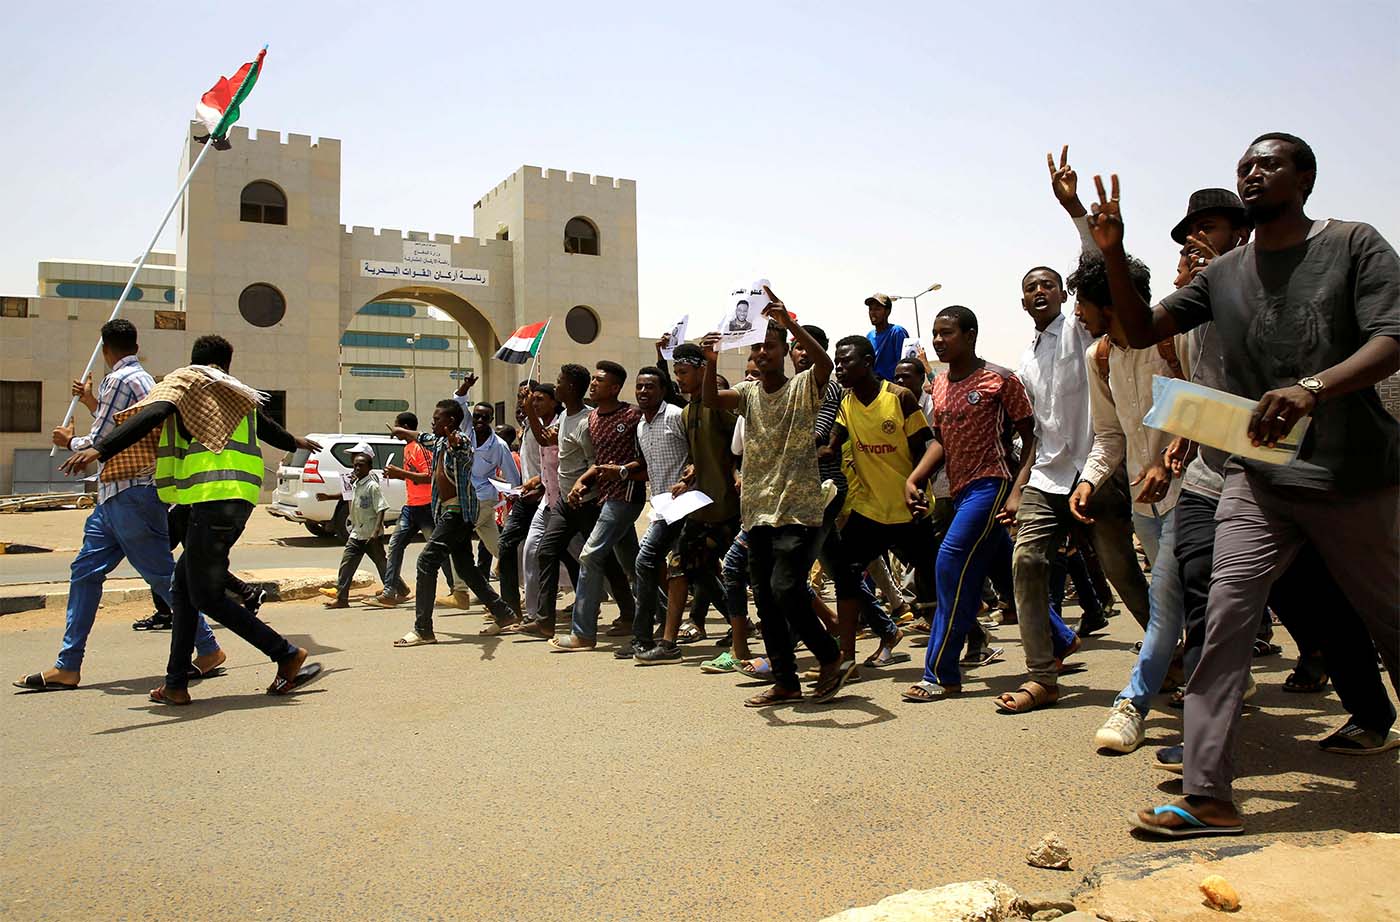 Protesters chant slogans outside Defence Ministry in Khartoum